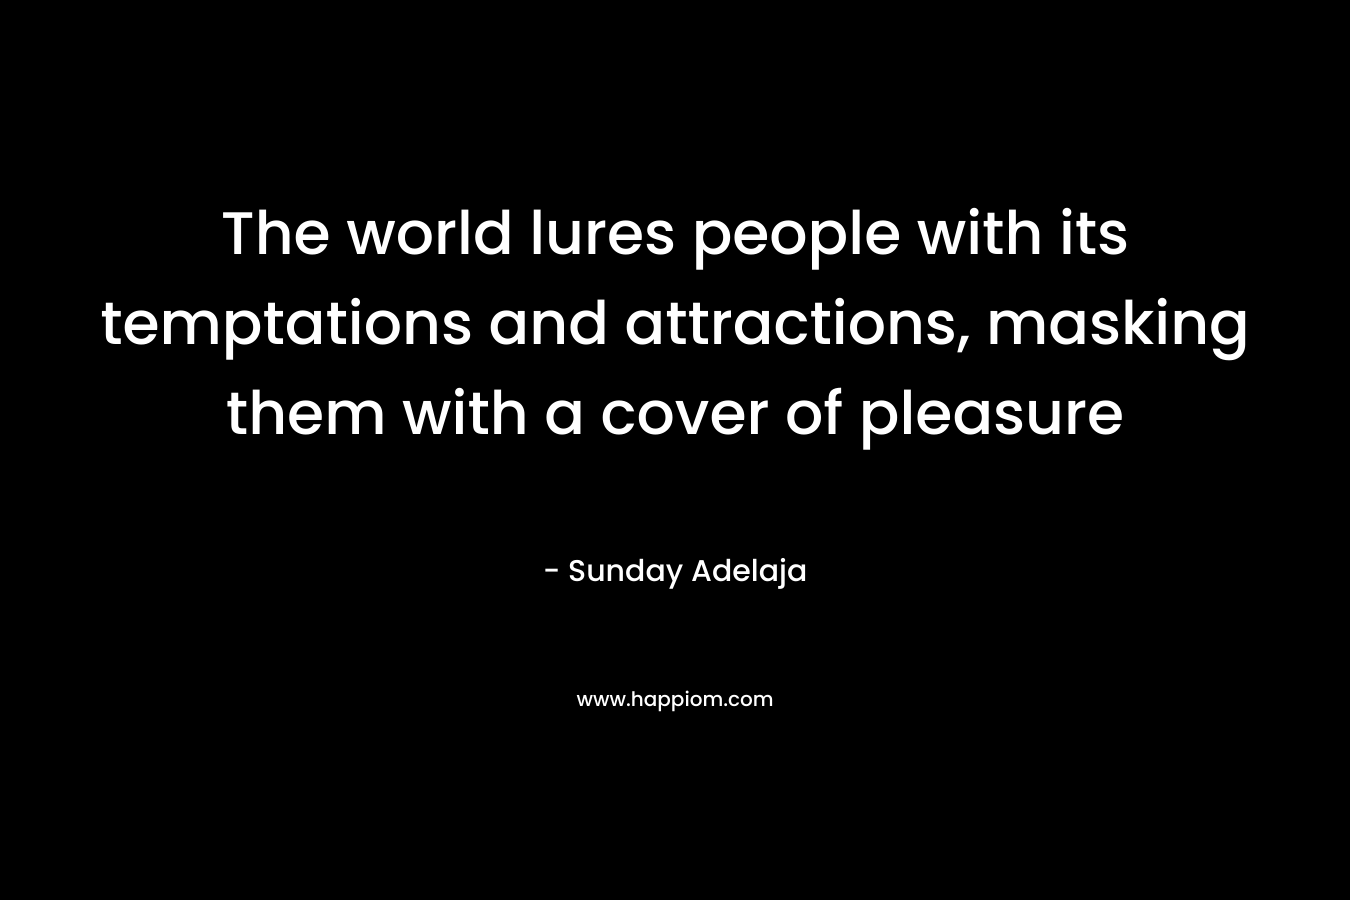 The world lures people with its temptations and attractions, masking them with a cover of pleasure